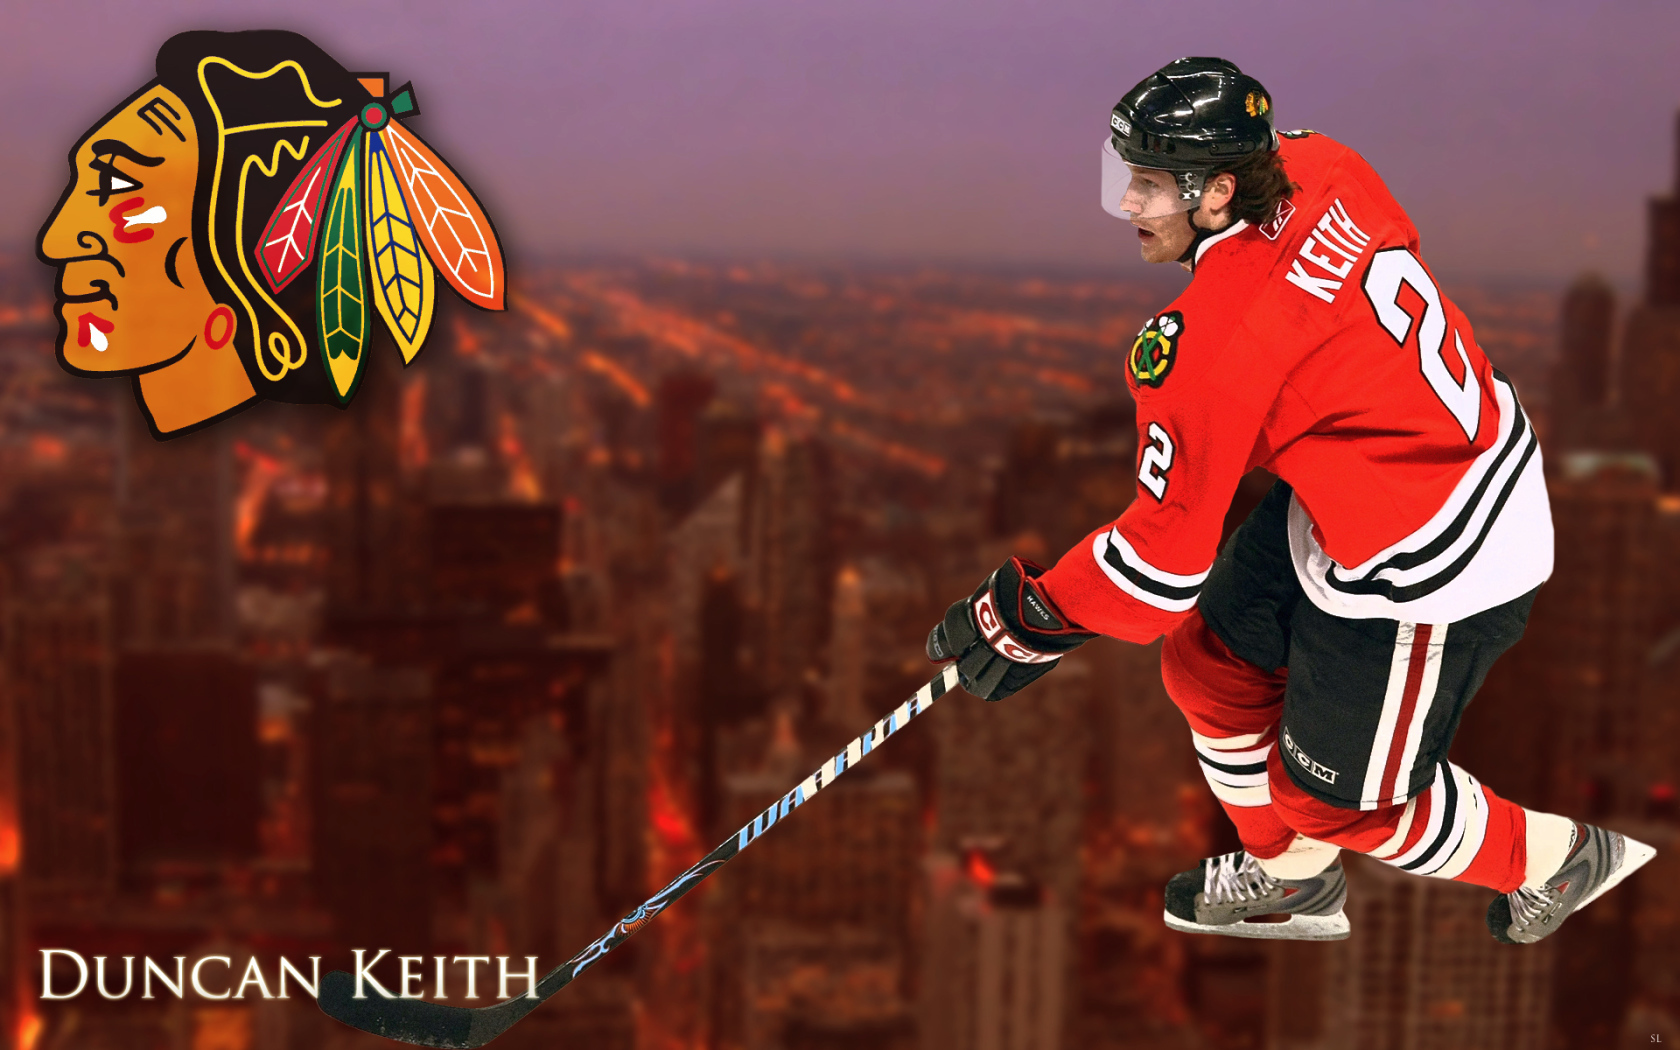 Famous Hockey player Duncan Keith